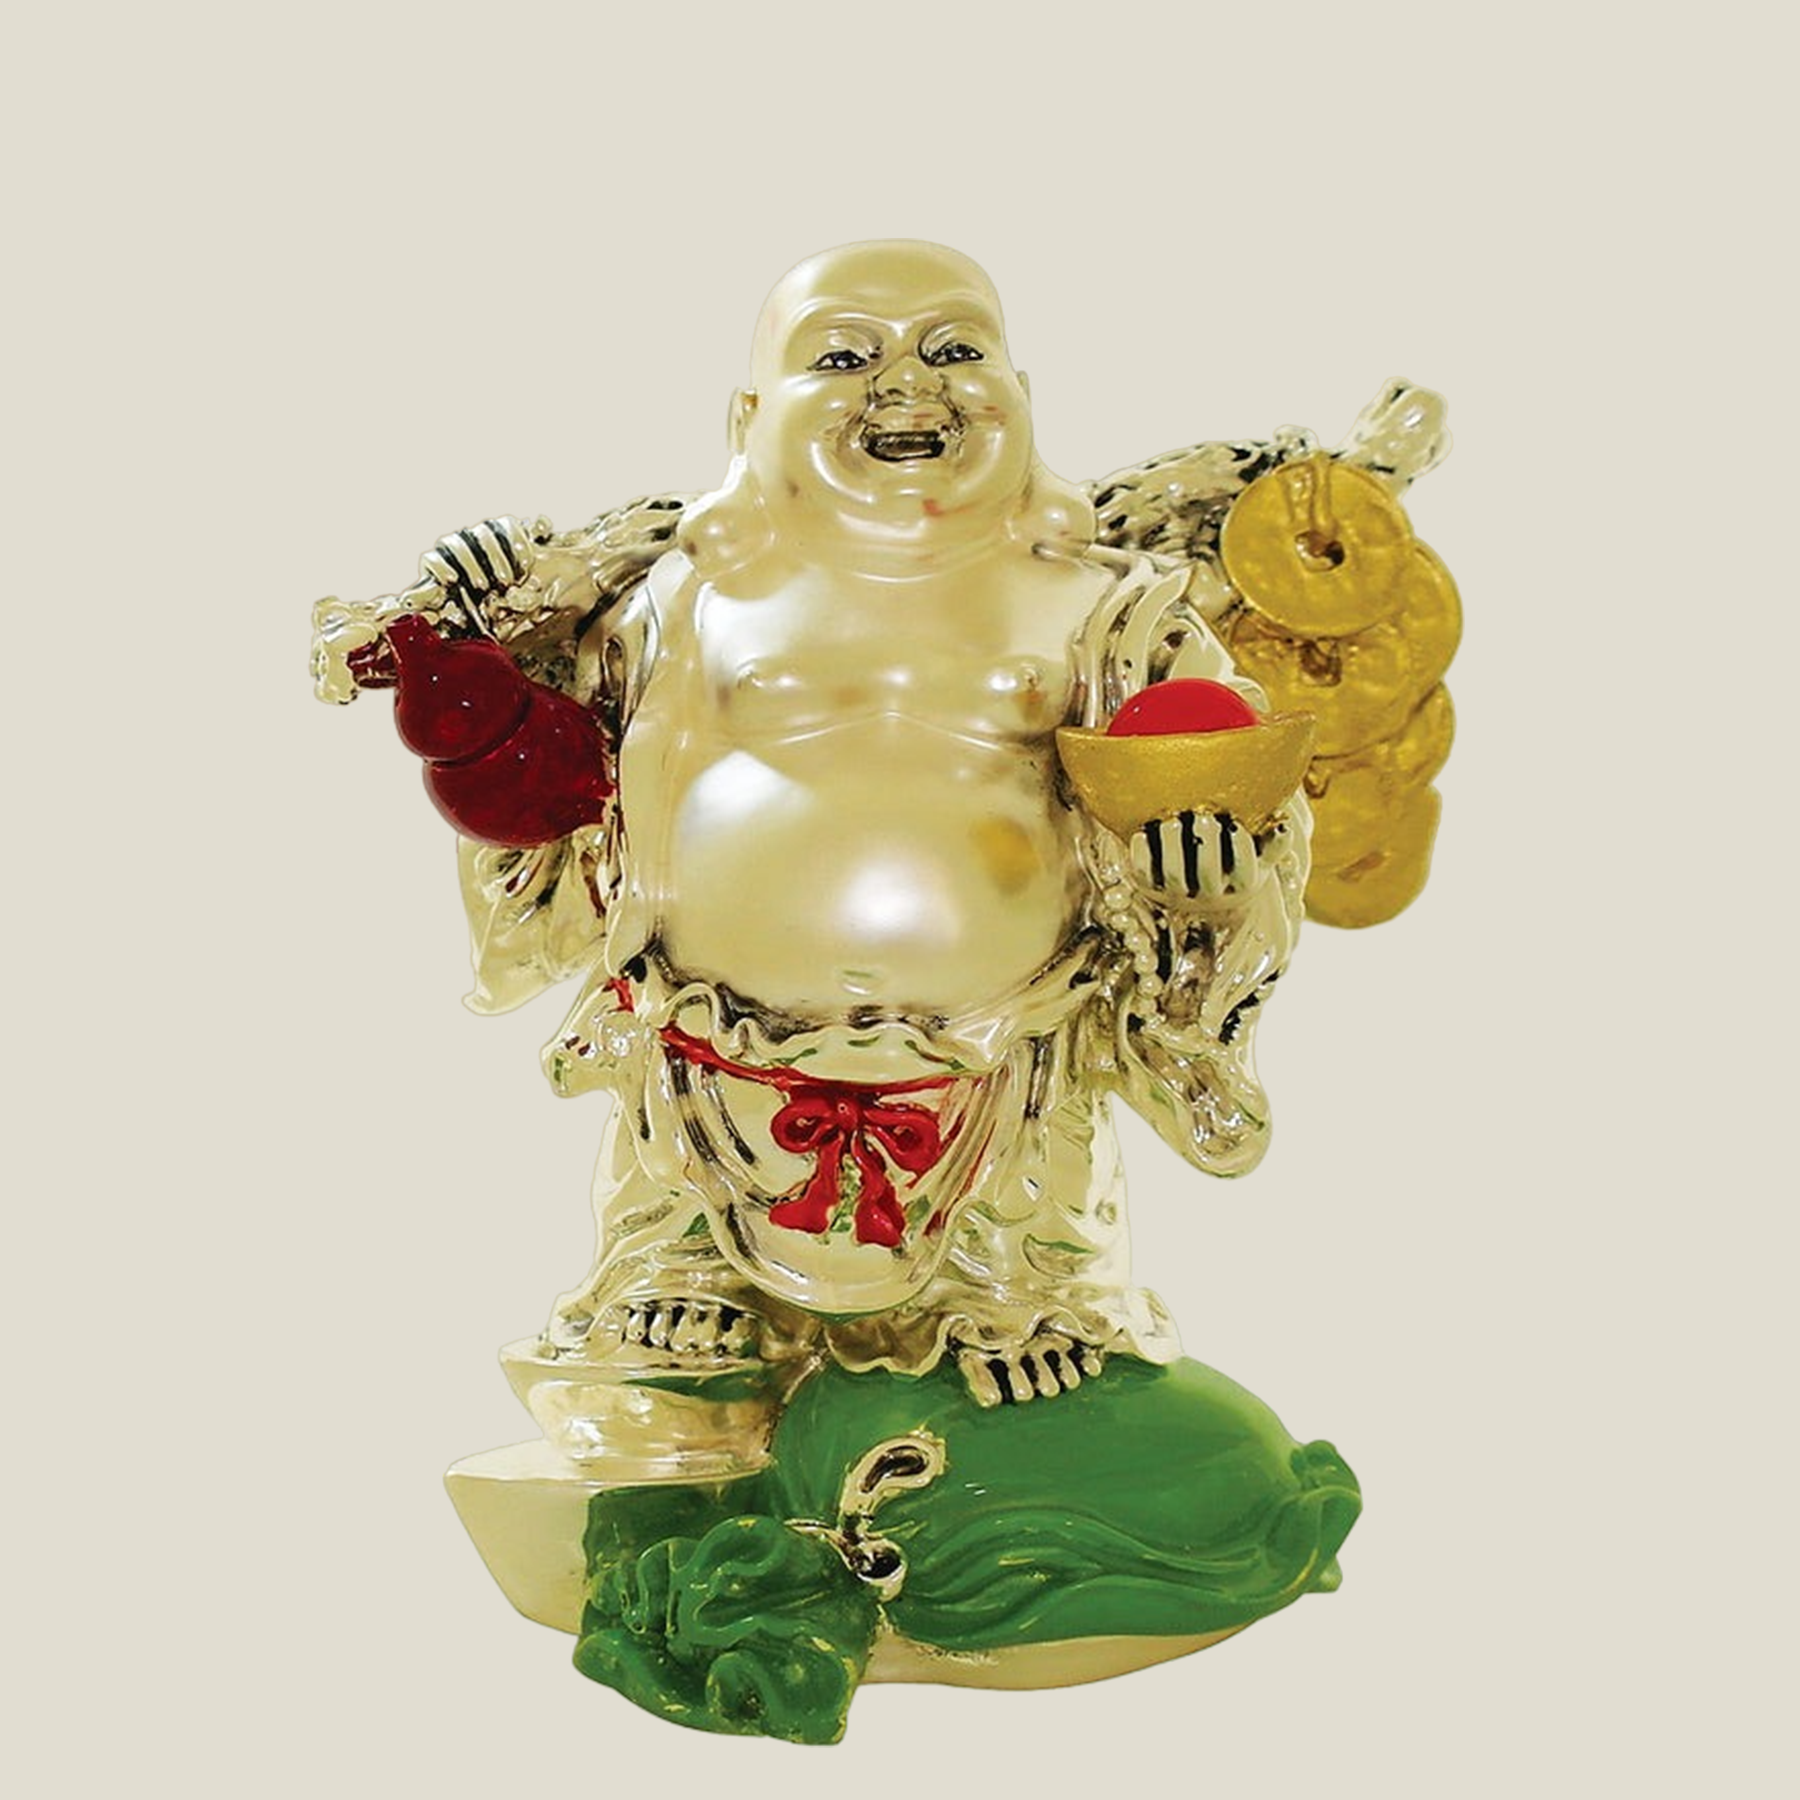 Laughing Buddha With Green Bag- Colored